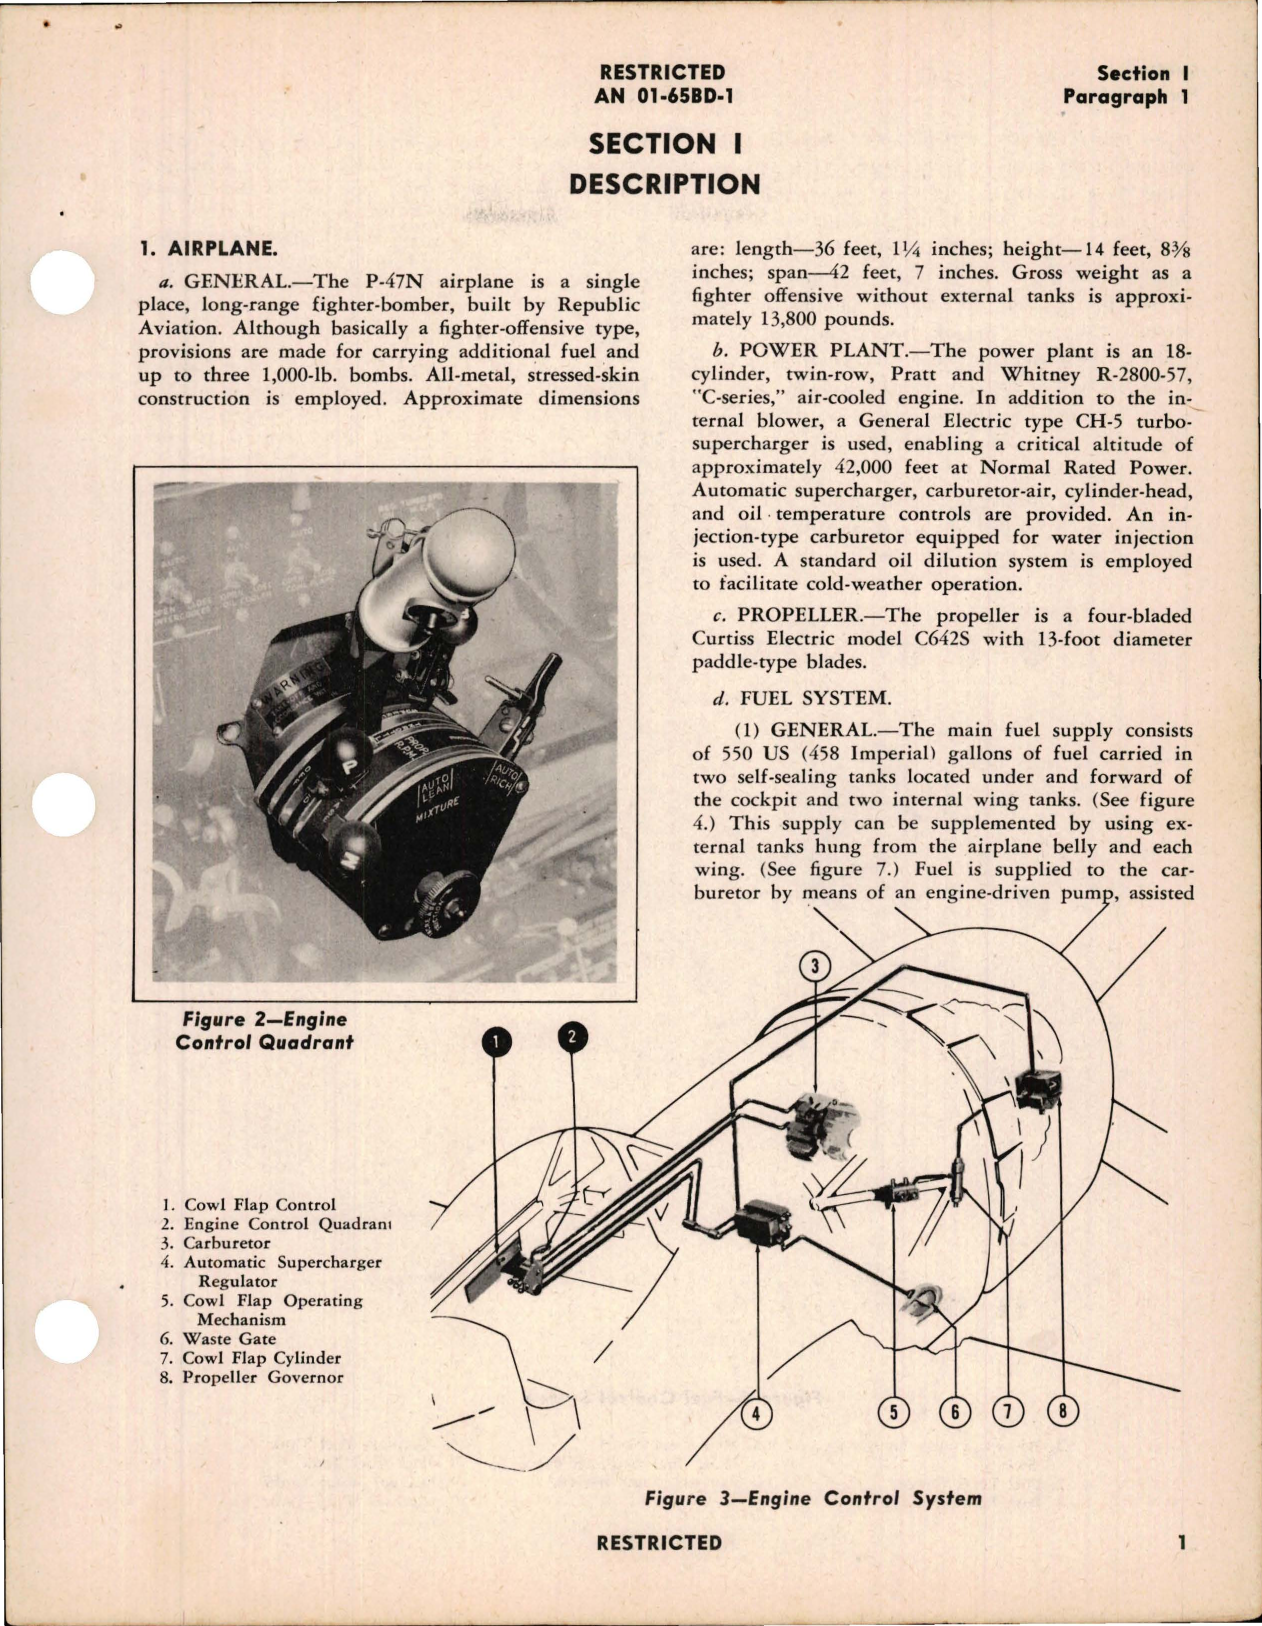 Sample page 5 from AirCorps Library document: Pilot's Flight Operating Instructions for P-47N